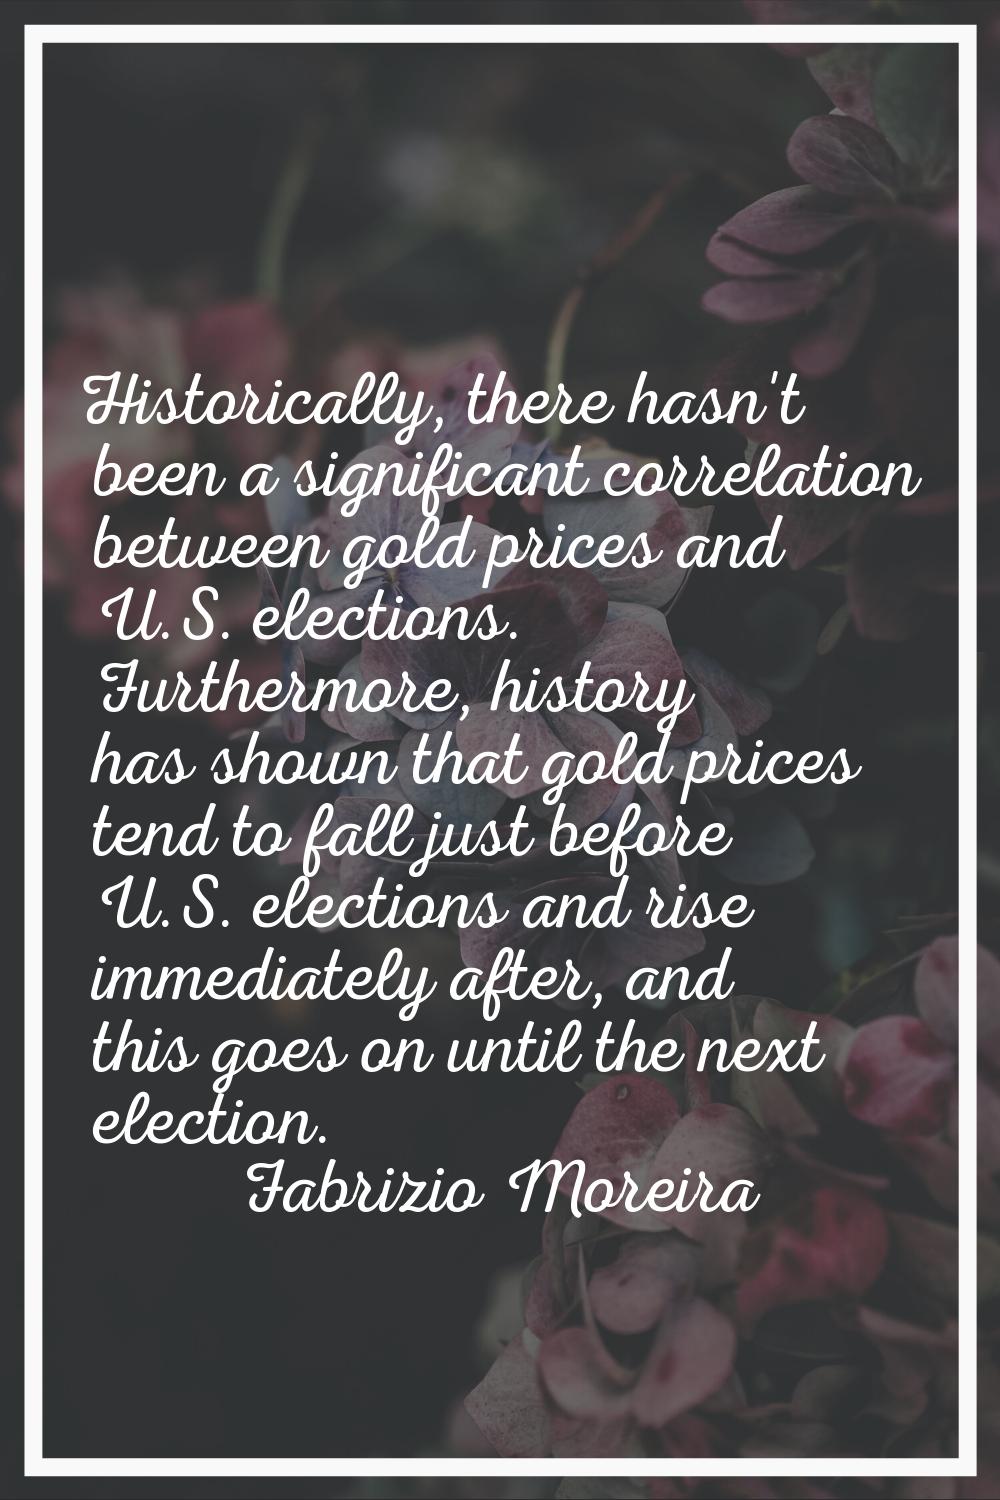 Historically, there hasn't been a significant correlation between gold prices and U.S. elections. F